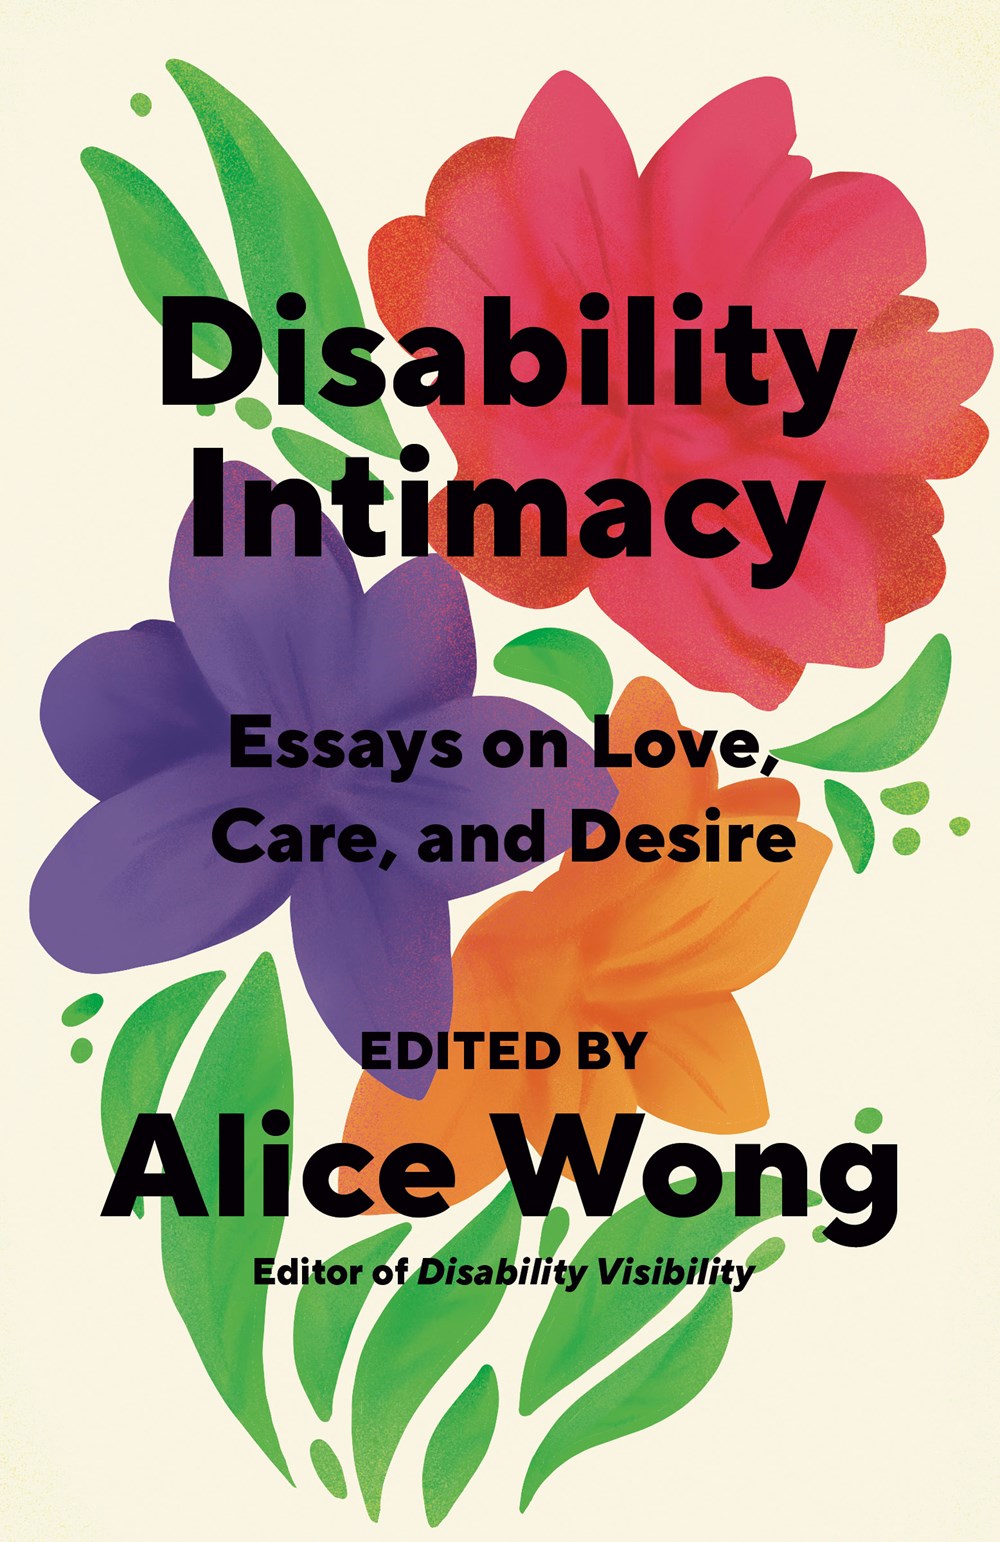 Disability Intimacy: Essays on Love, Care and Desire by Alice Wong (Paperback) (PREORDER)